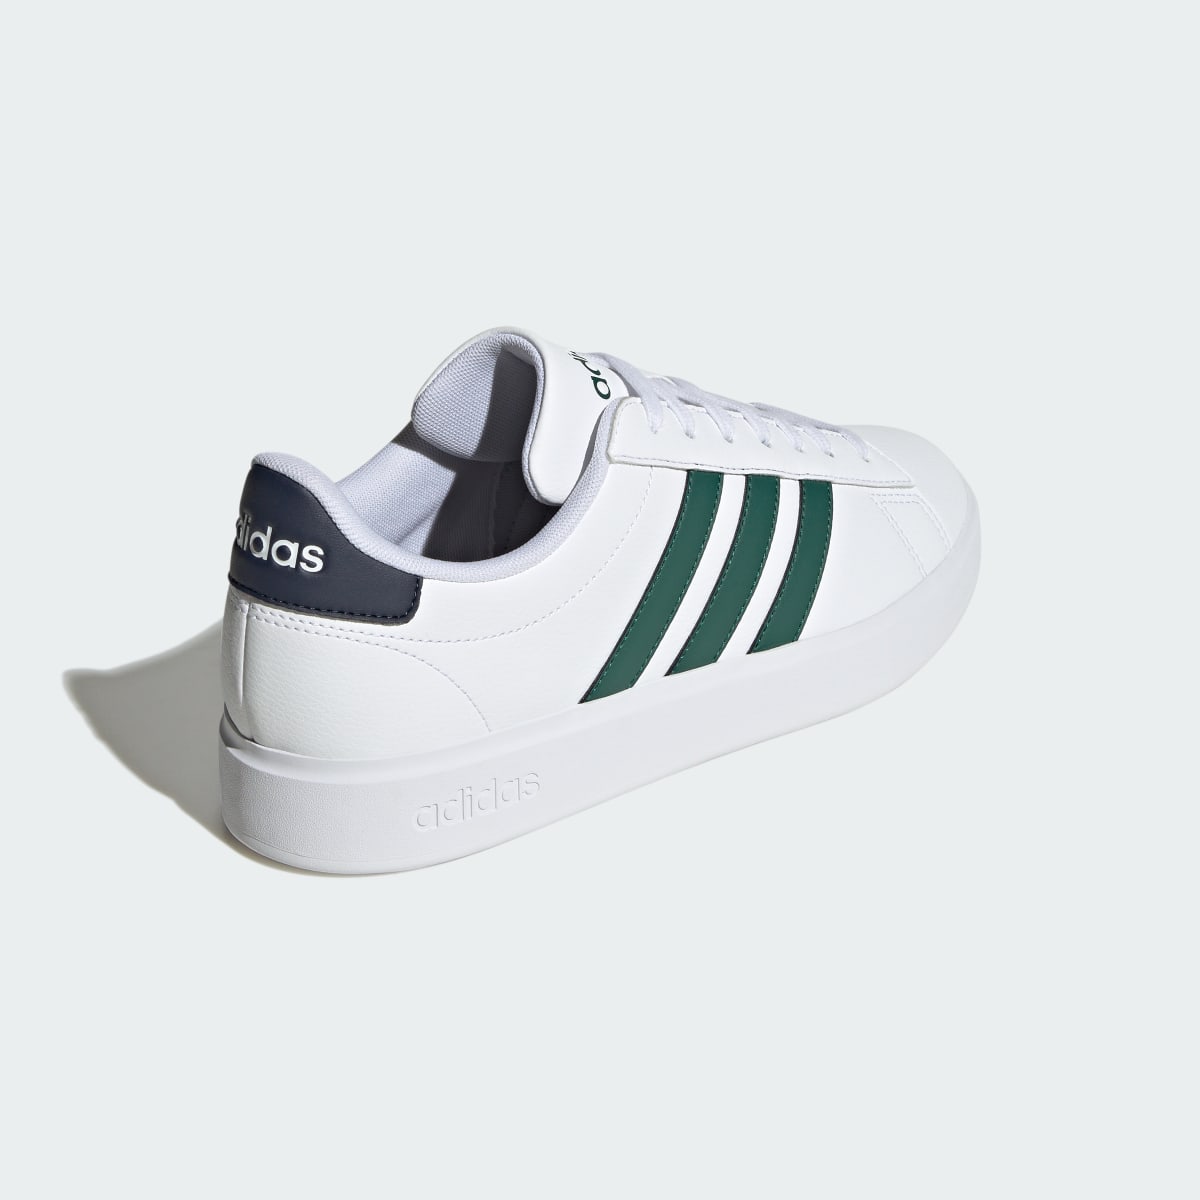 Adidas Grand Court Shoes. 6